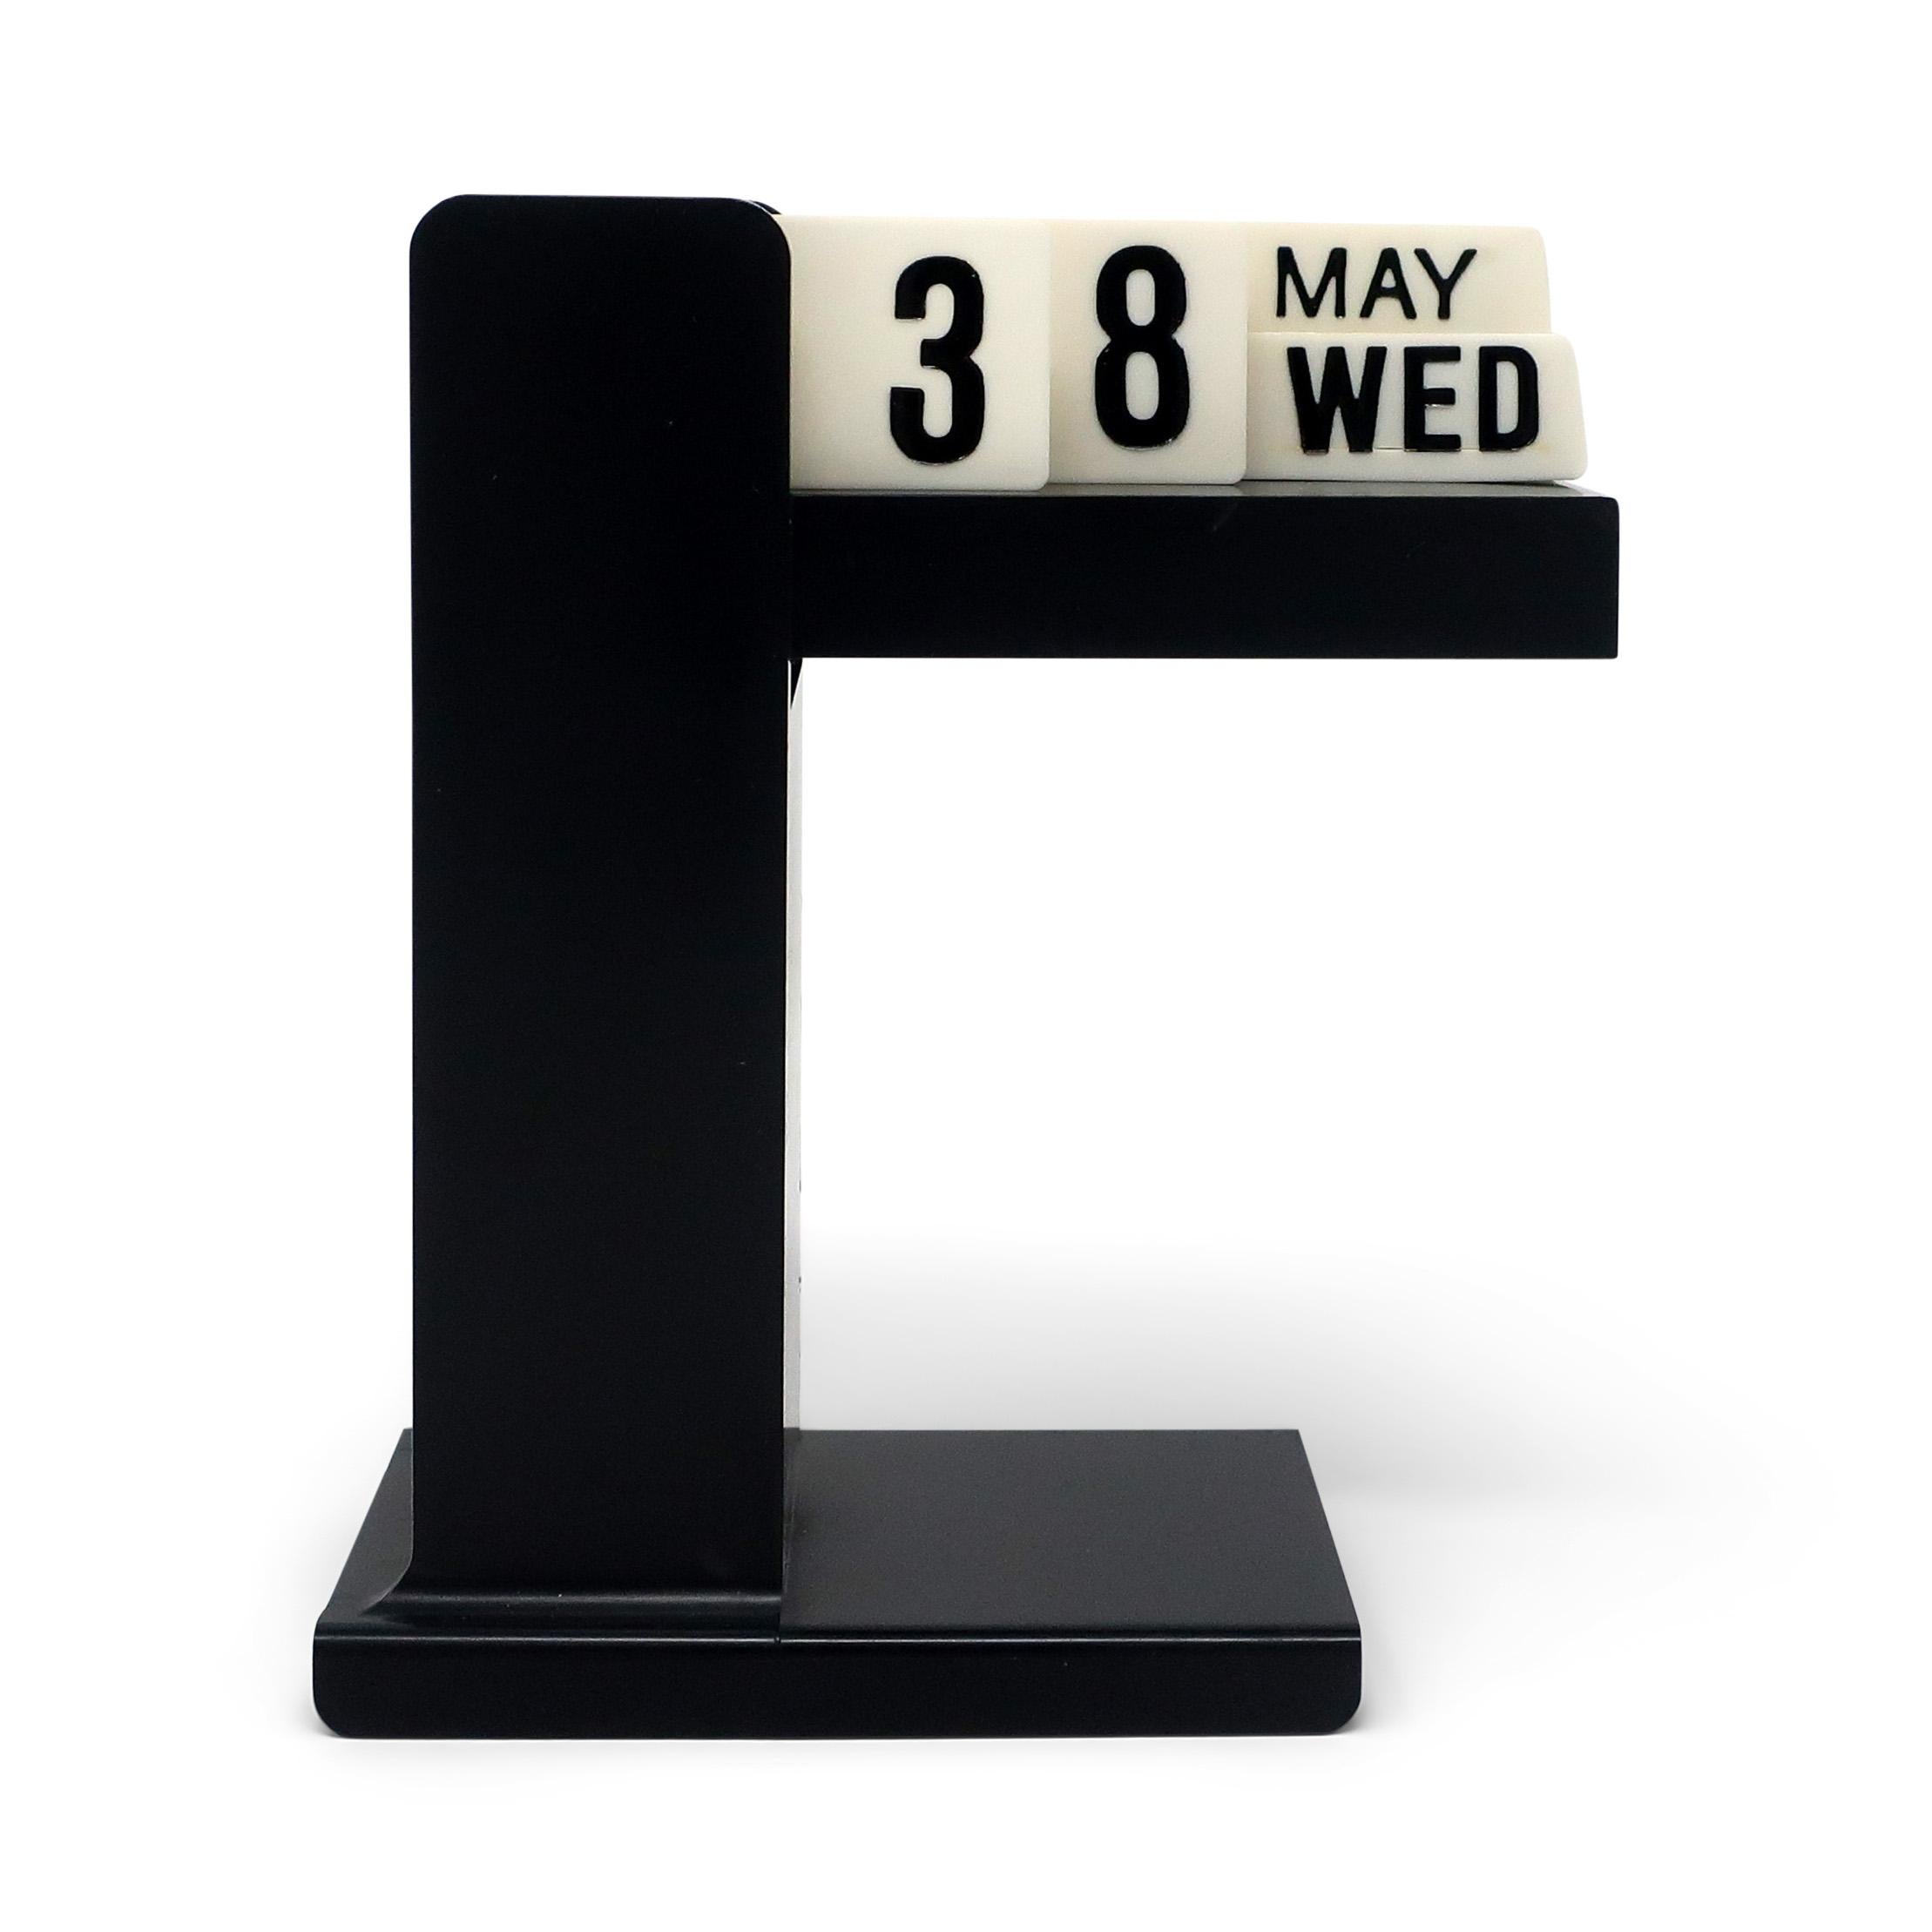 In the style of Enzo Mari’s Timor calendar for Danese Milano from 1967, this perpetual flip desk calendar has a black base and white strips that can be rotated to track the month, date, and day of the week. In excellent vintage condition with wear